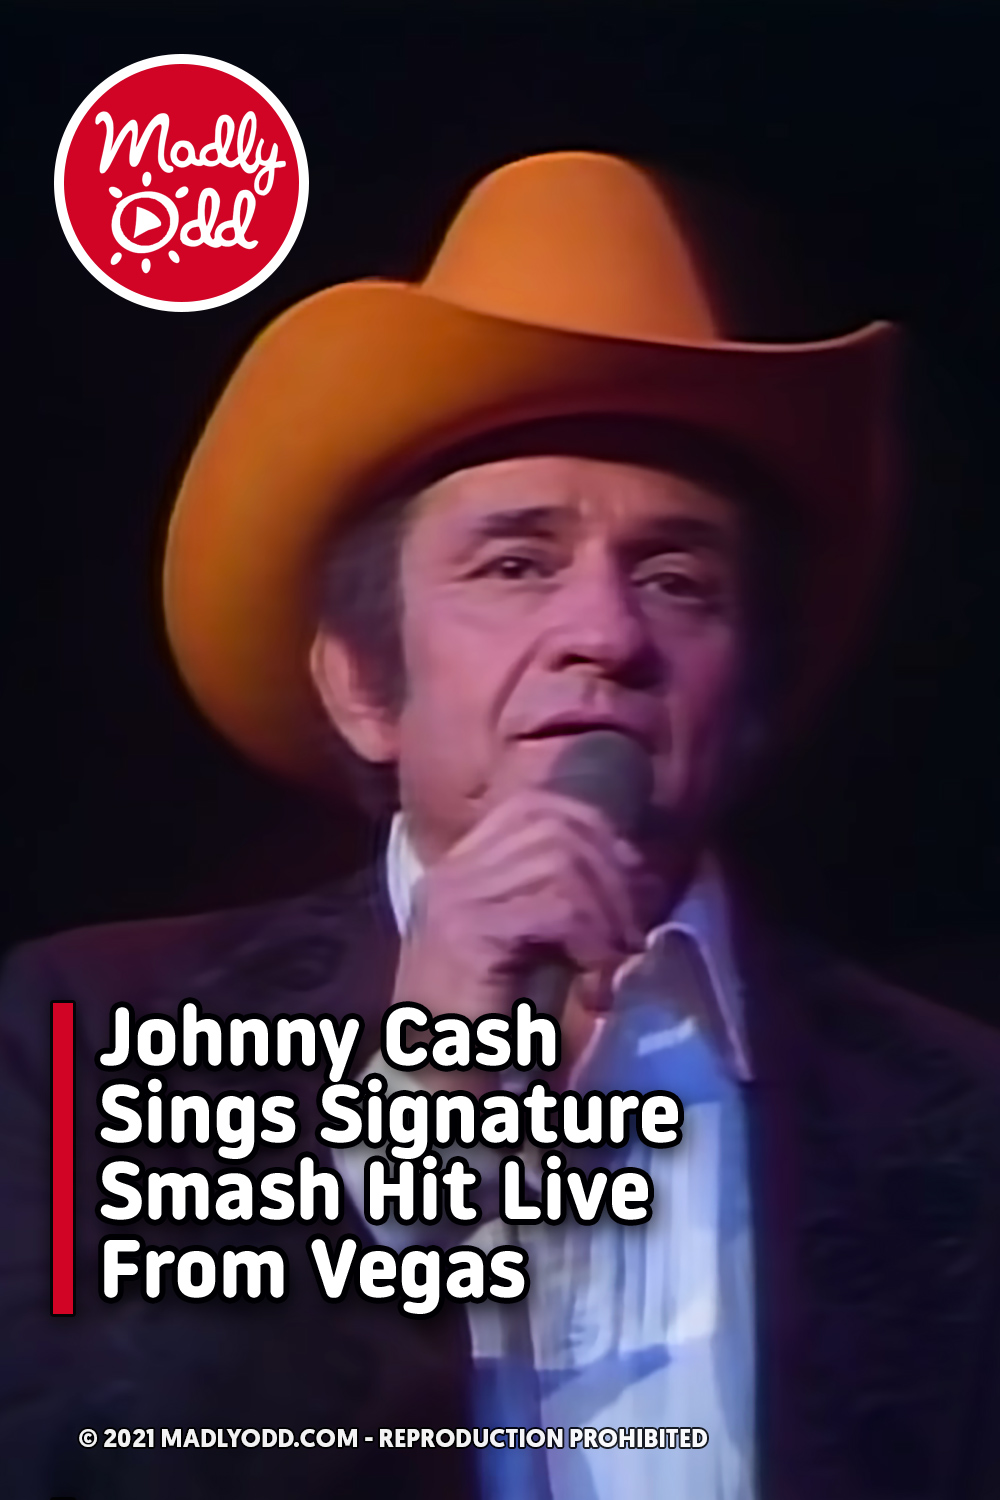 Johnny Cash Sings Signature Smash Hit Live From Vegas